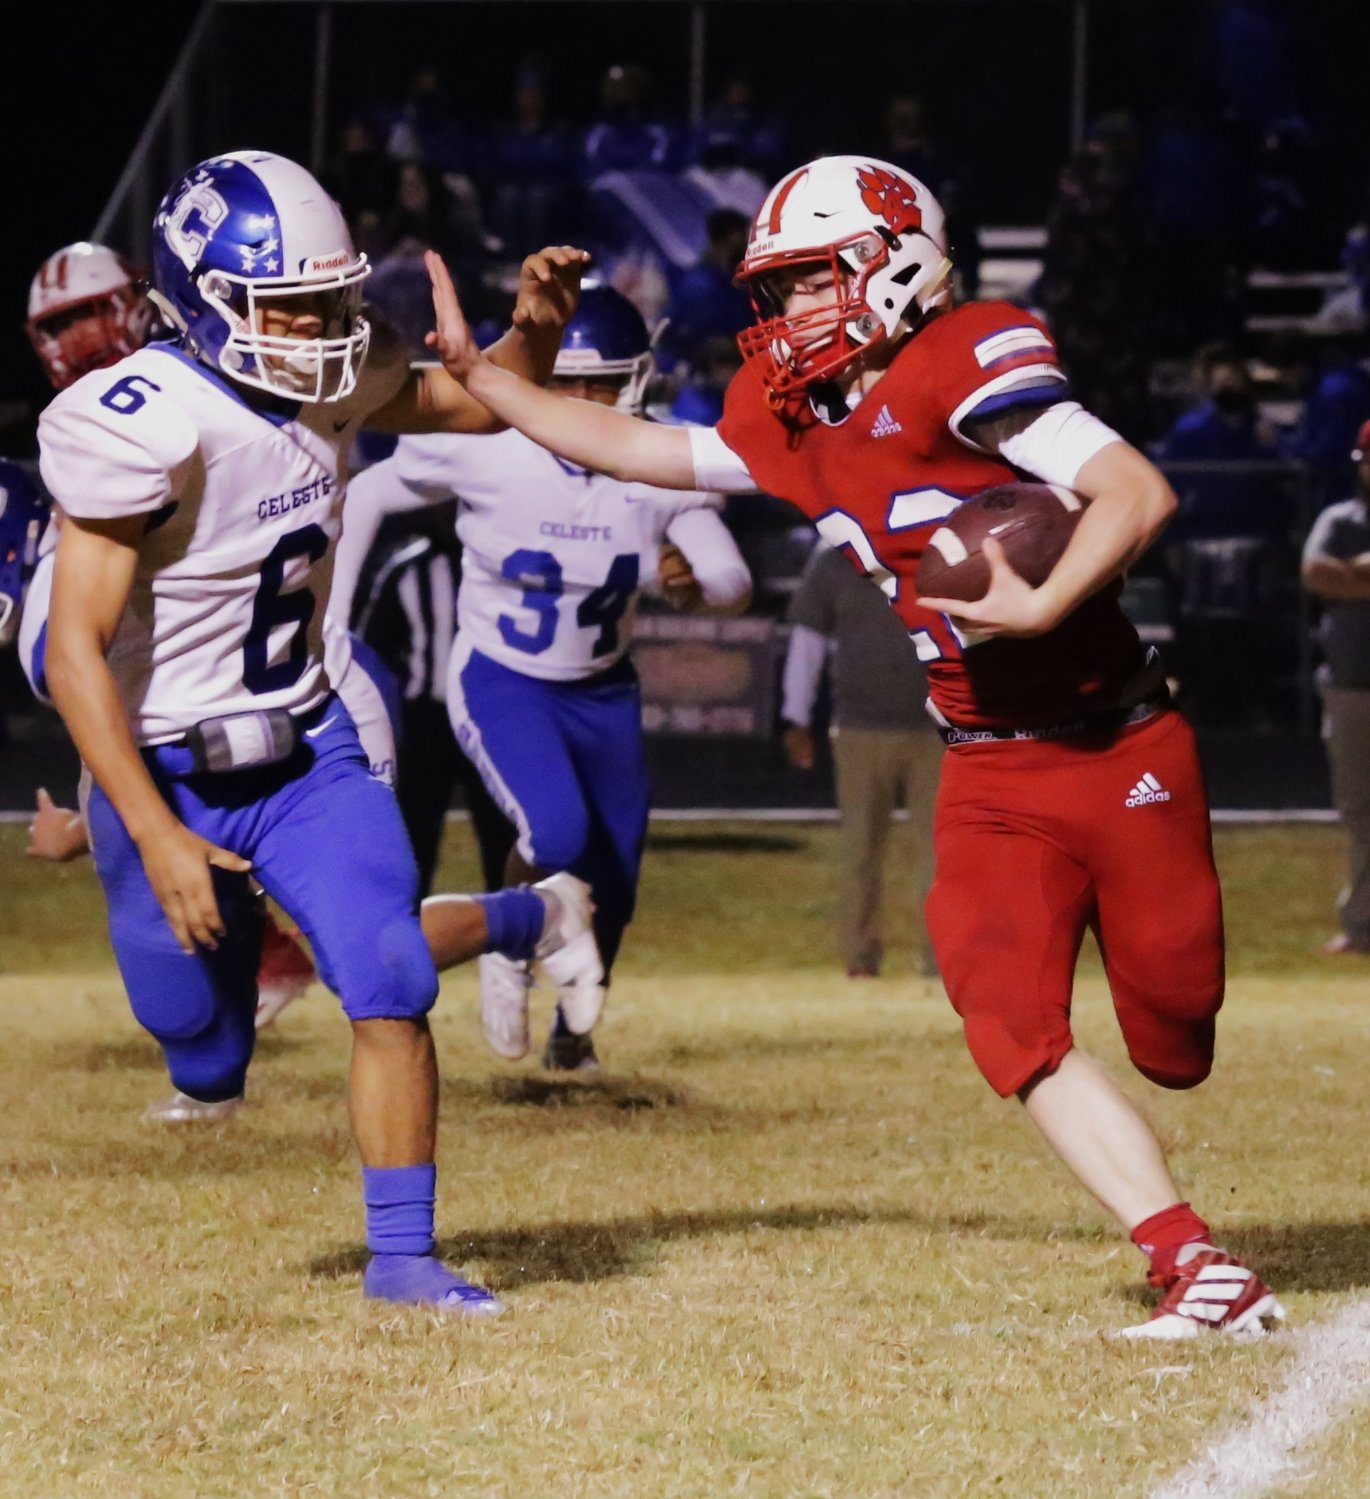 Panther Glen Hartley uses a stiff-arm to gain the edge in action against Celeste. (Monitor photo by John Arbter)